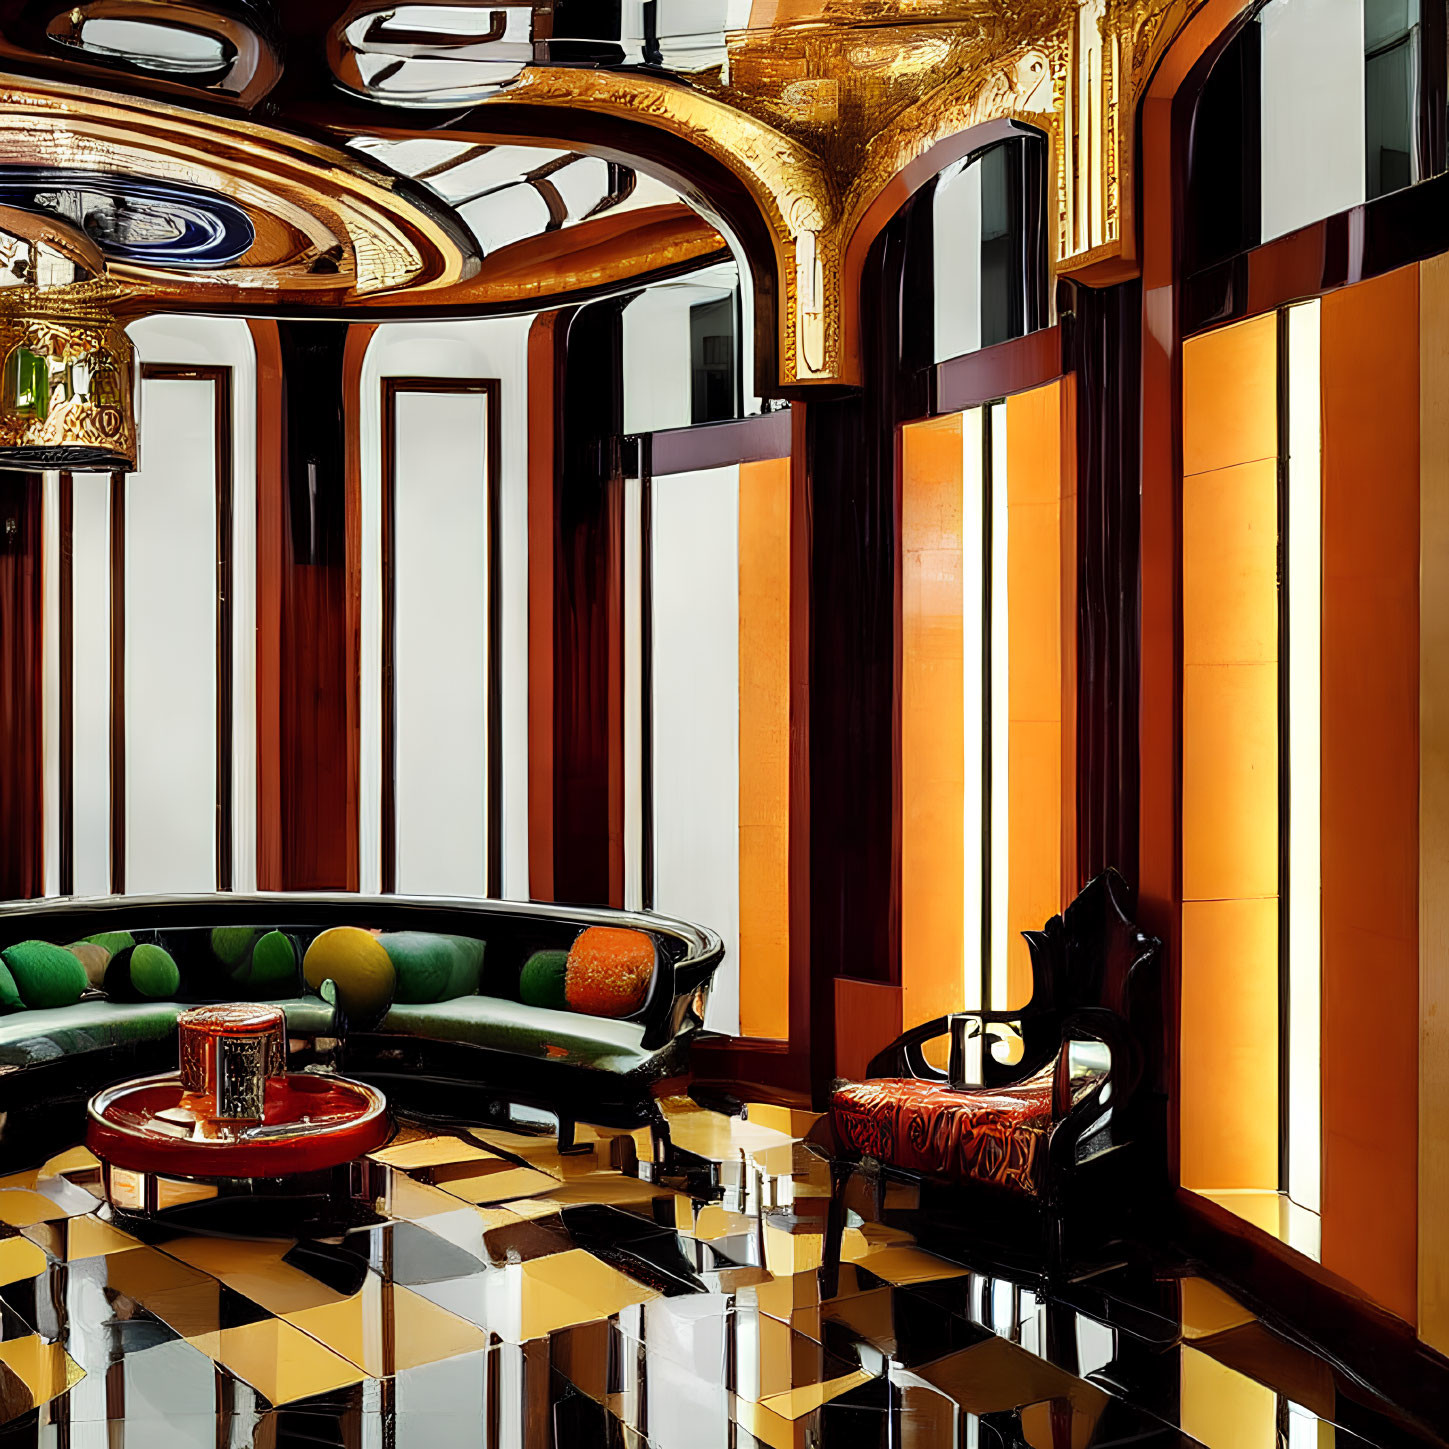 Luxurious Art Deco Interior with Geometric Patterns & Gold Accents